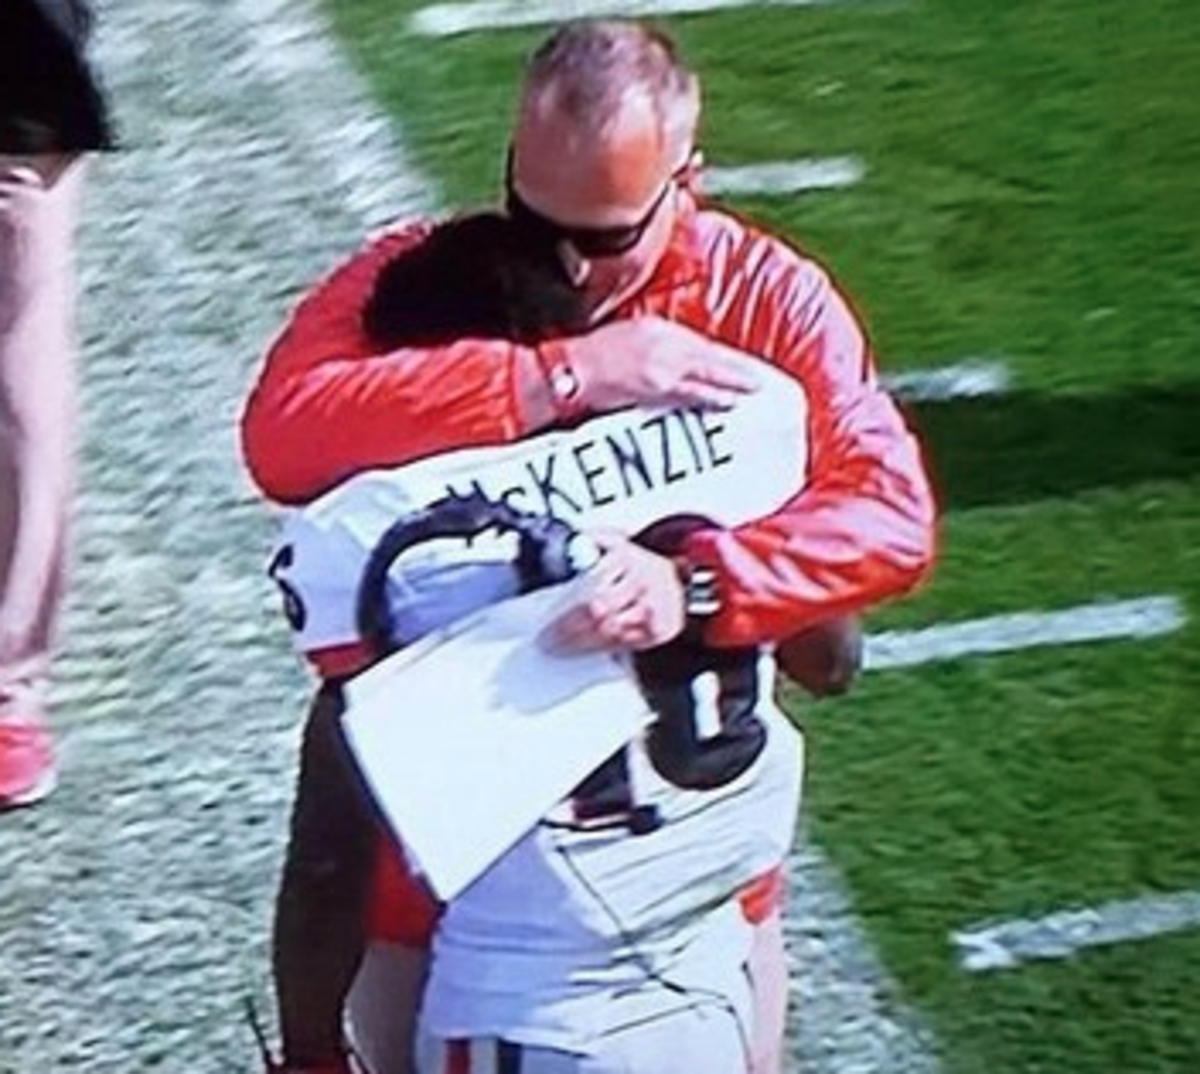 Isaiah McKenzie embraces his coach on the sideline.